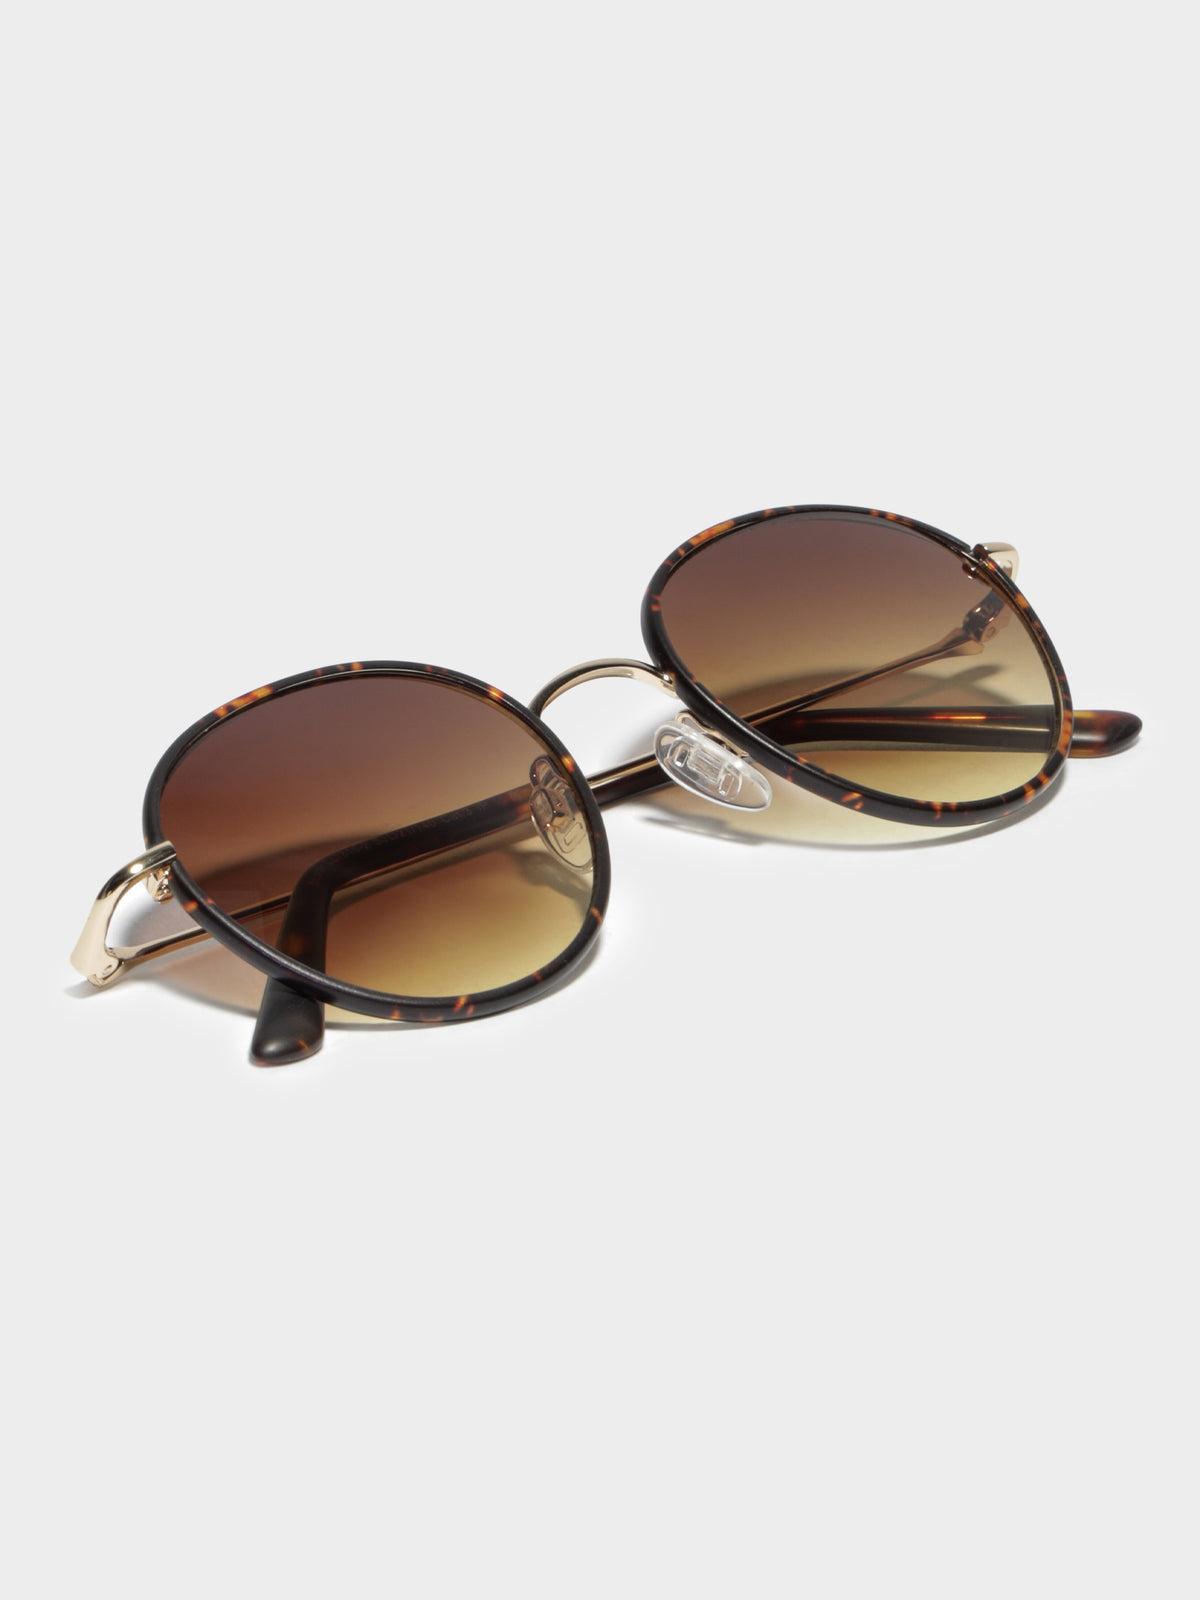 CL781602 Miami Sunglasses in Gold and Tortoise Shell